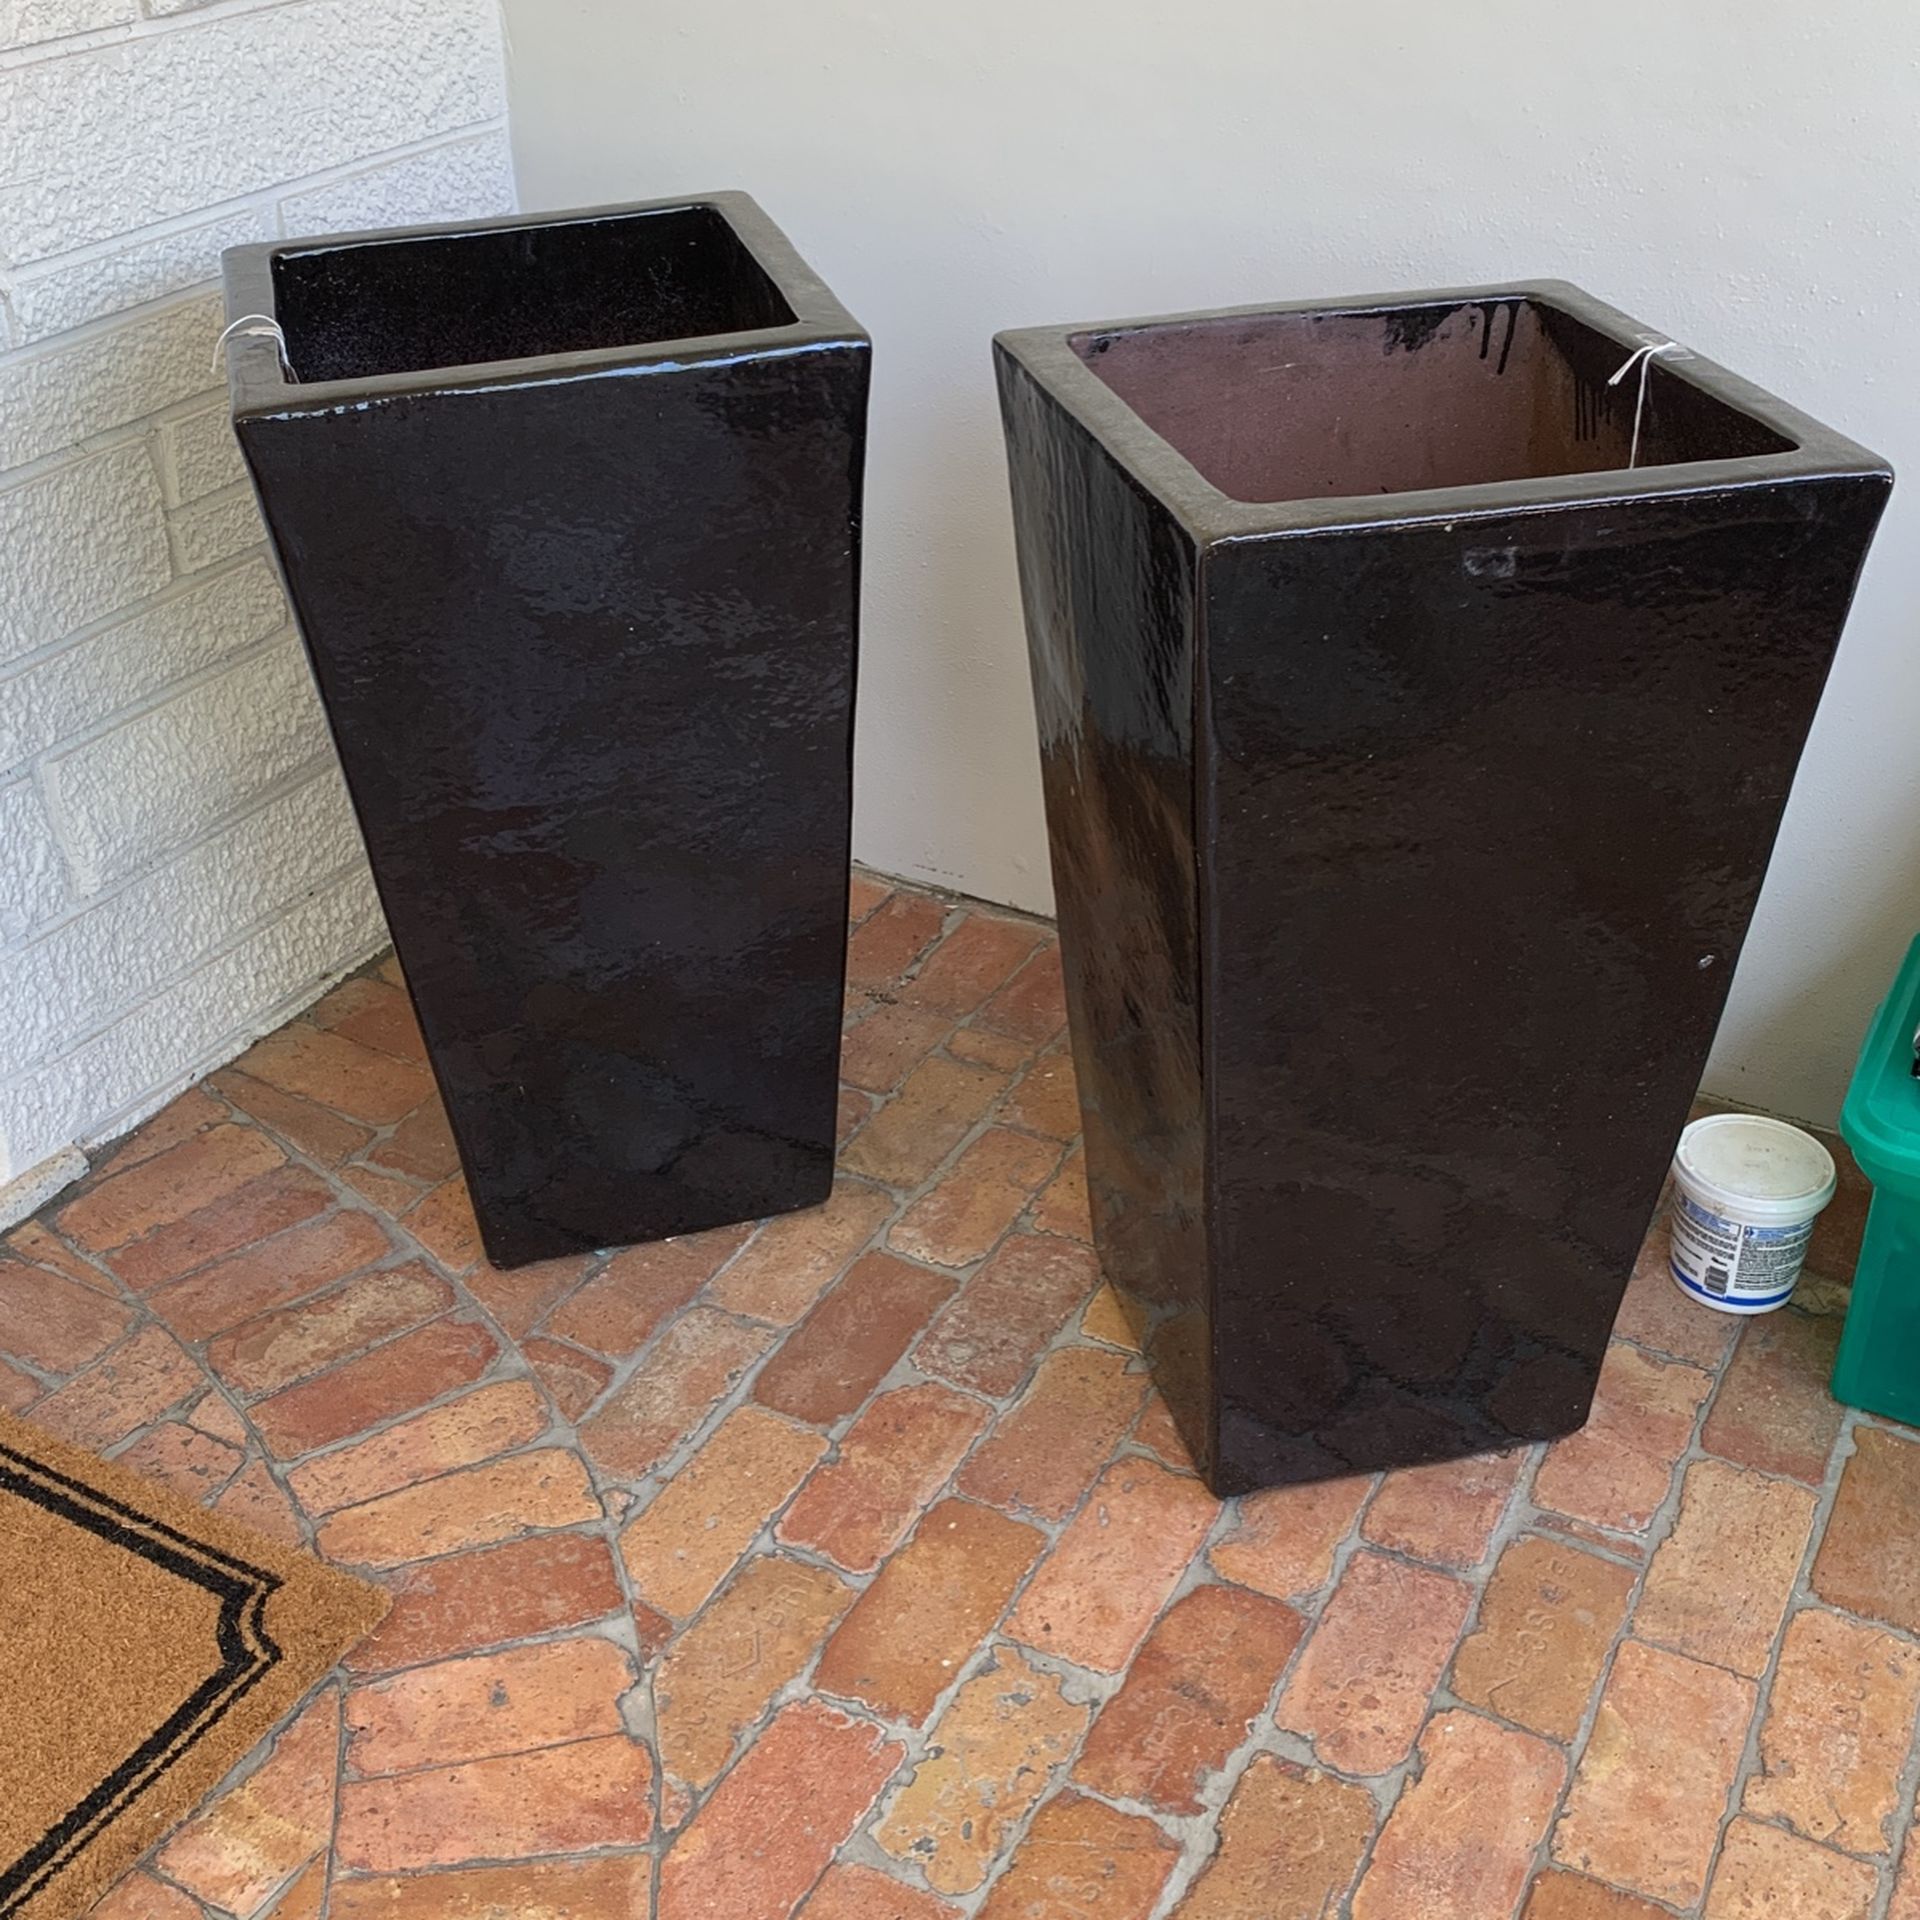 Terracotta “Real Planters” Not Plastic